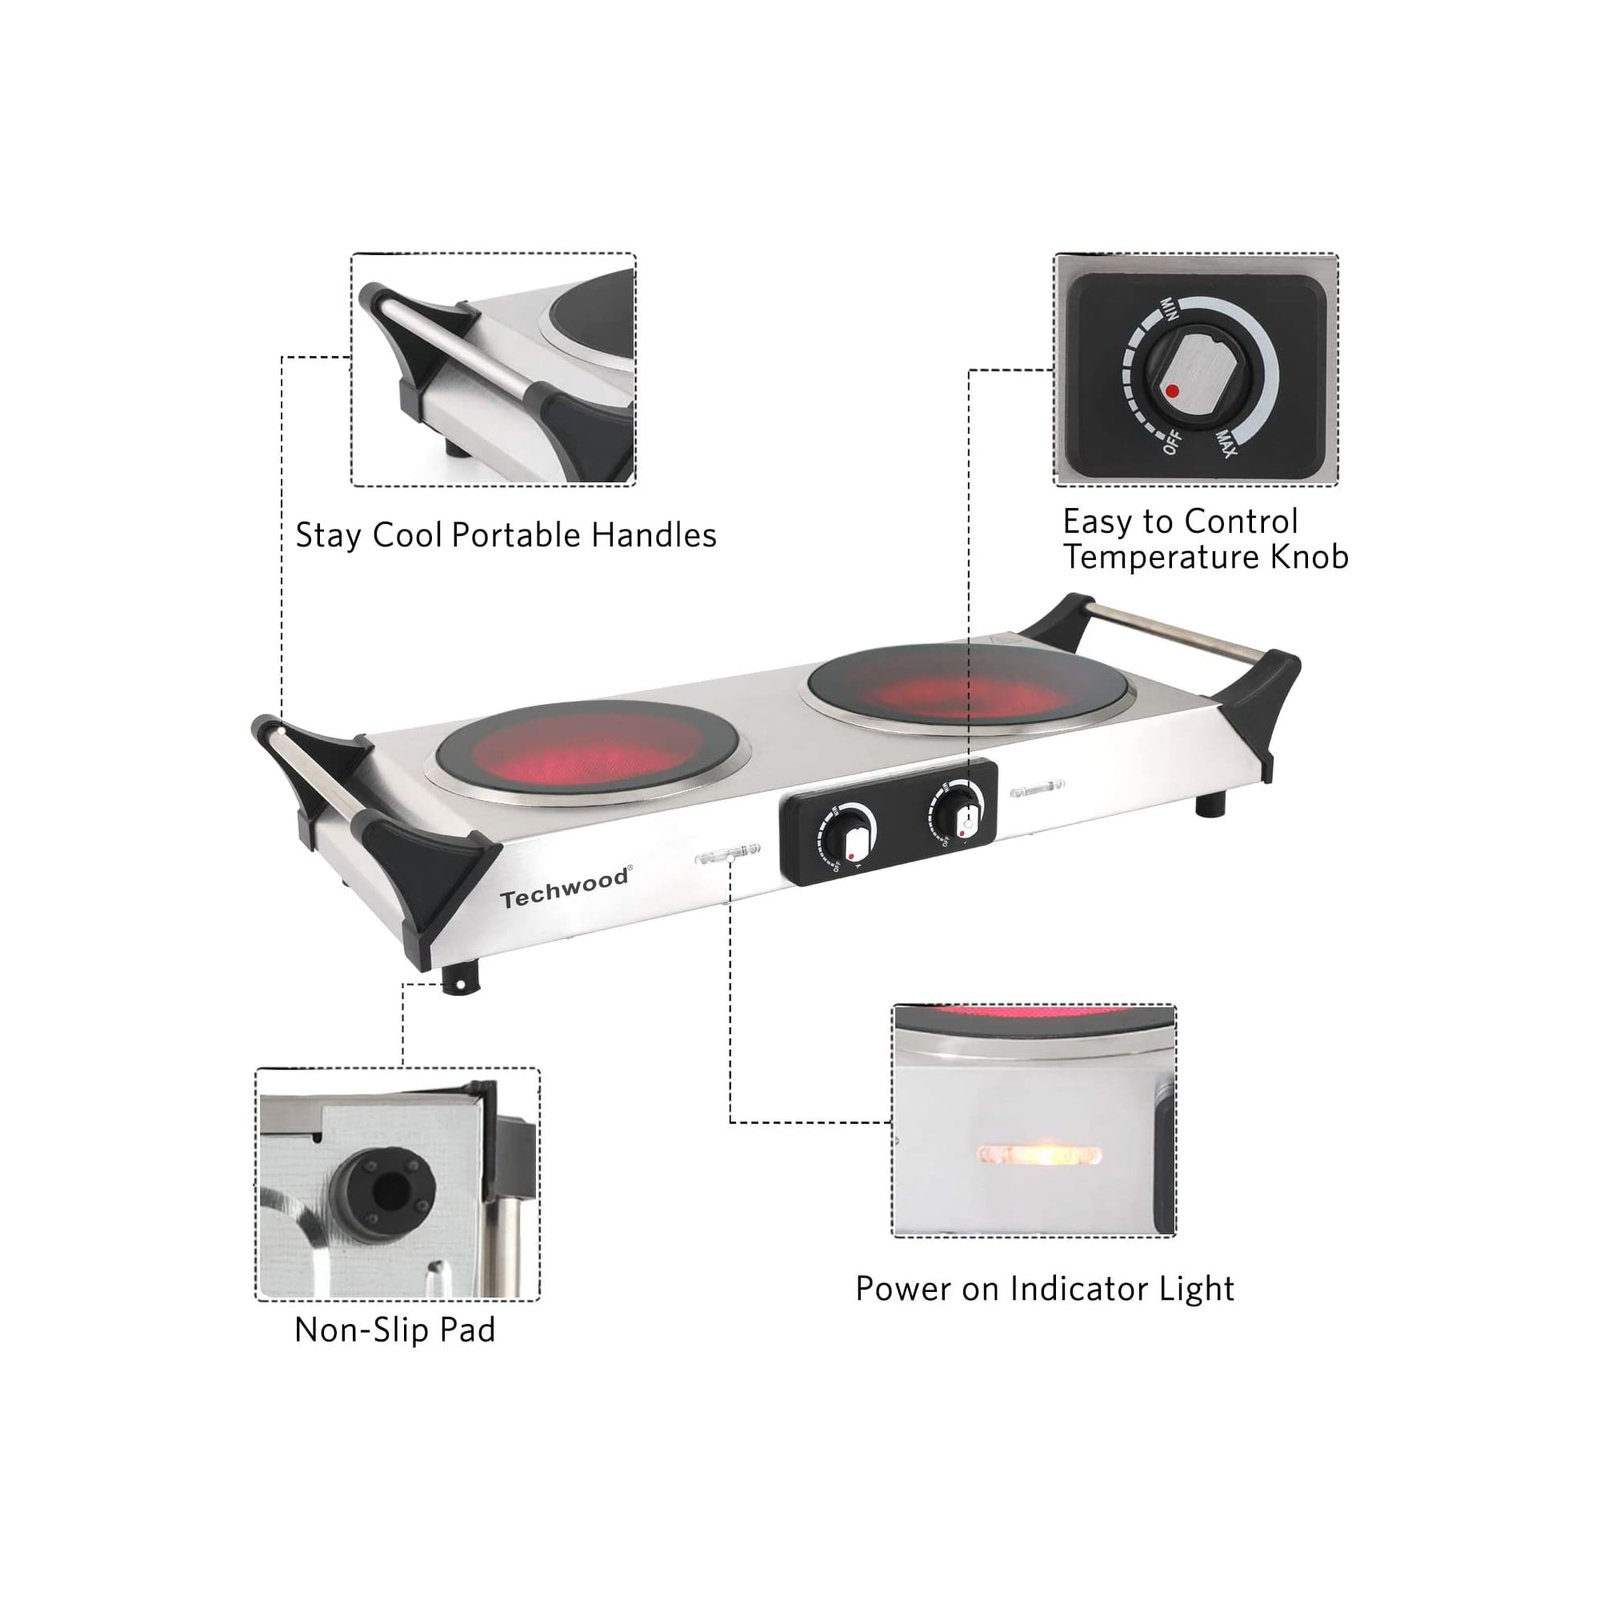 https://themarketdepot.com/wp-content/uploads/2023/01/Techwood-Hot-Plate-Portable-Electric-Stove-1800W-Countertop-Infrared-Ceramic-Double-Burner-with-Adjustable-Temperature-Stay-Cool-Handles-OfficeHomeCamp-Use-Compatible-for-All-Cookwares-4.jpeg